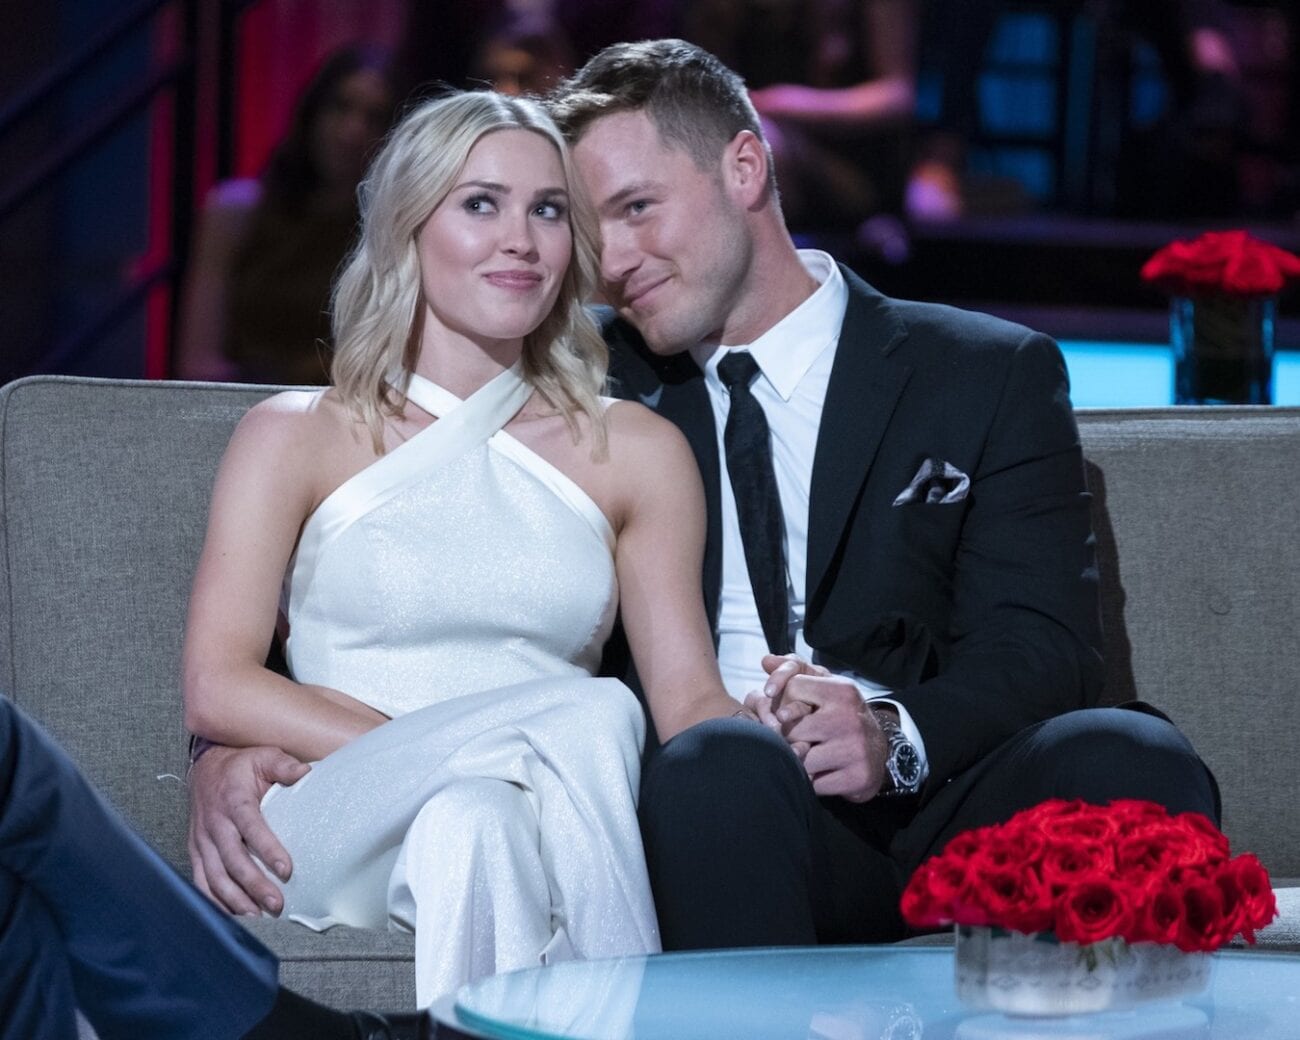 Has Colton Underwood from 'The Bachelor' been stalking his ex Cassie Randolph? Read the details and learn about the restraining order Randolph filed.